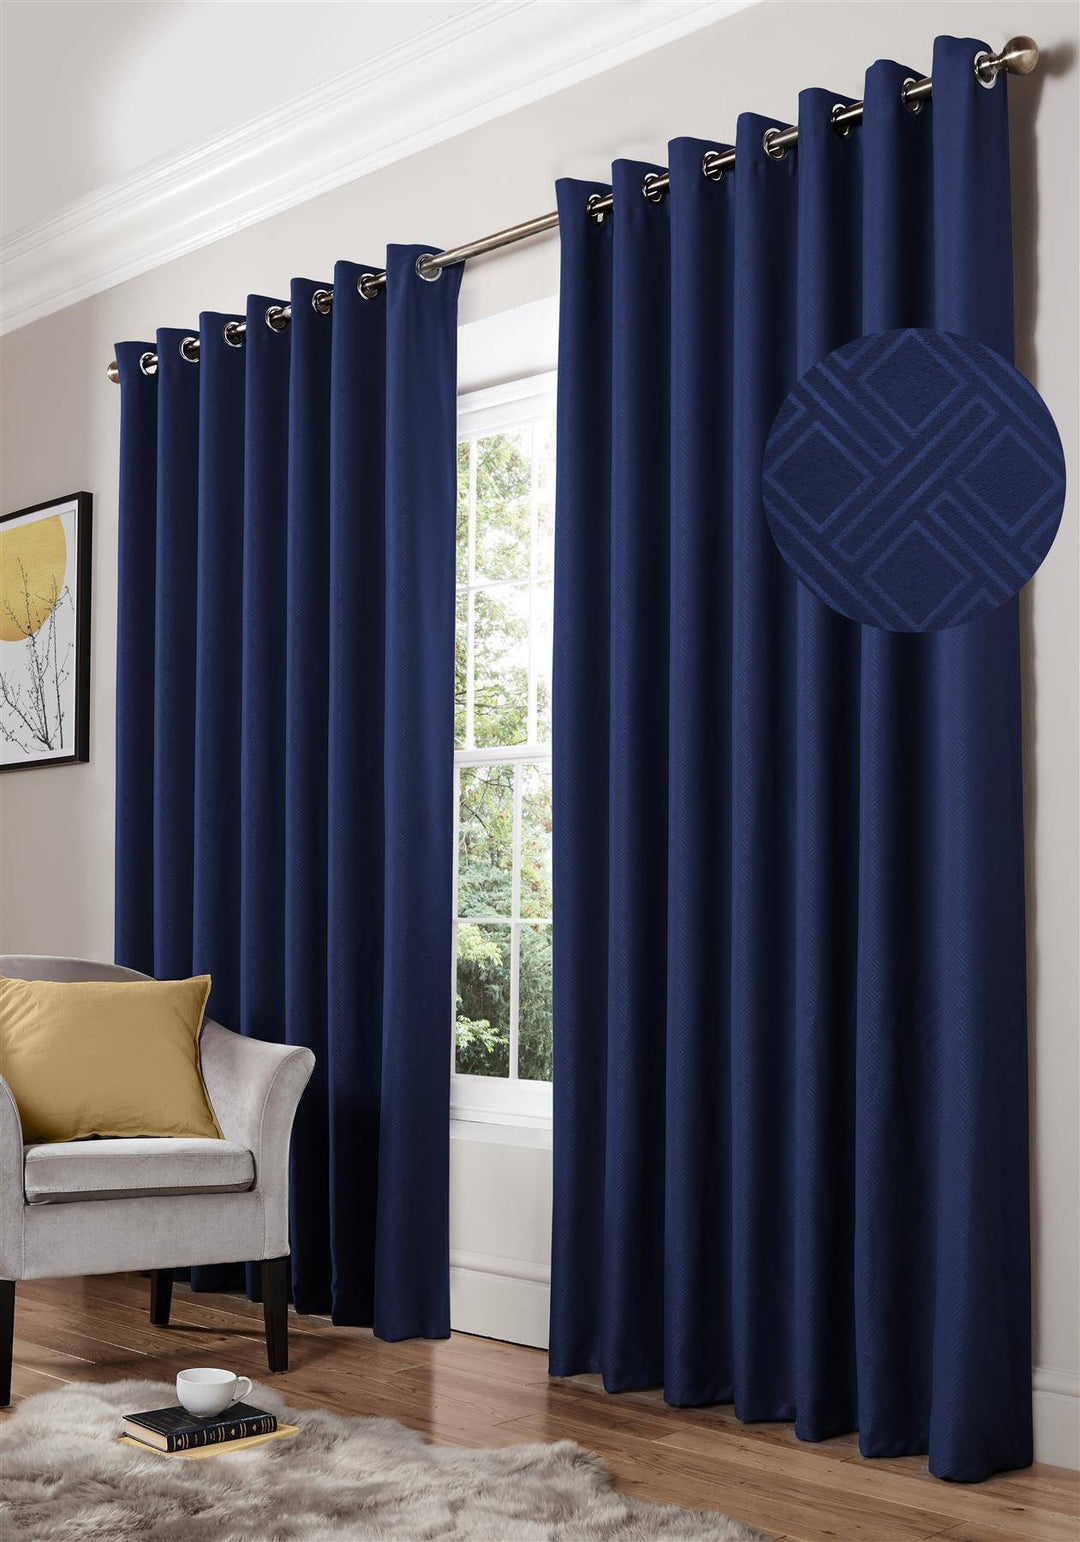 Diamond Blackout (Ring Top Curtains) - TidySpaces